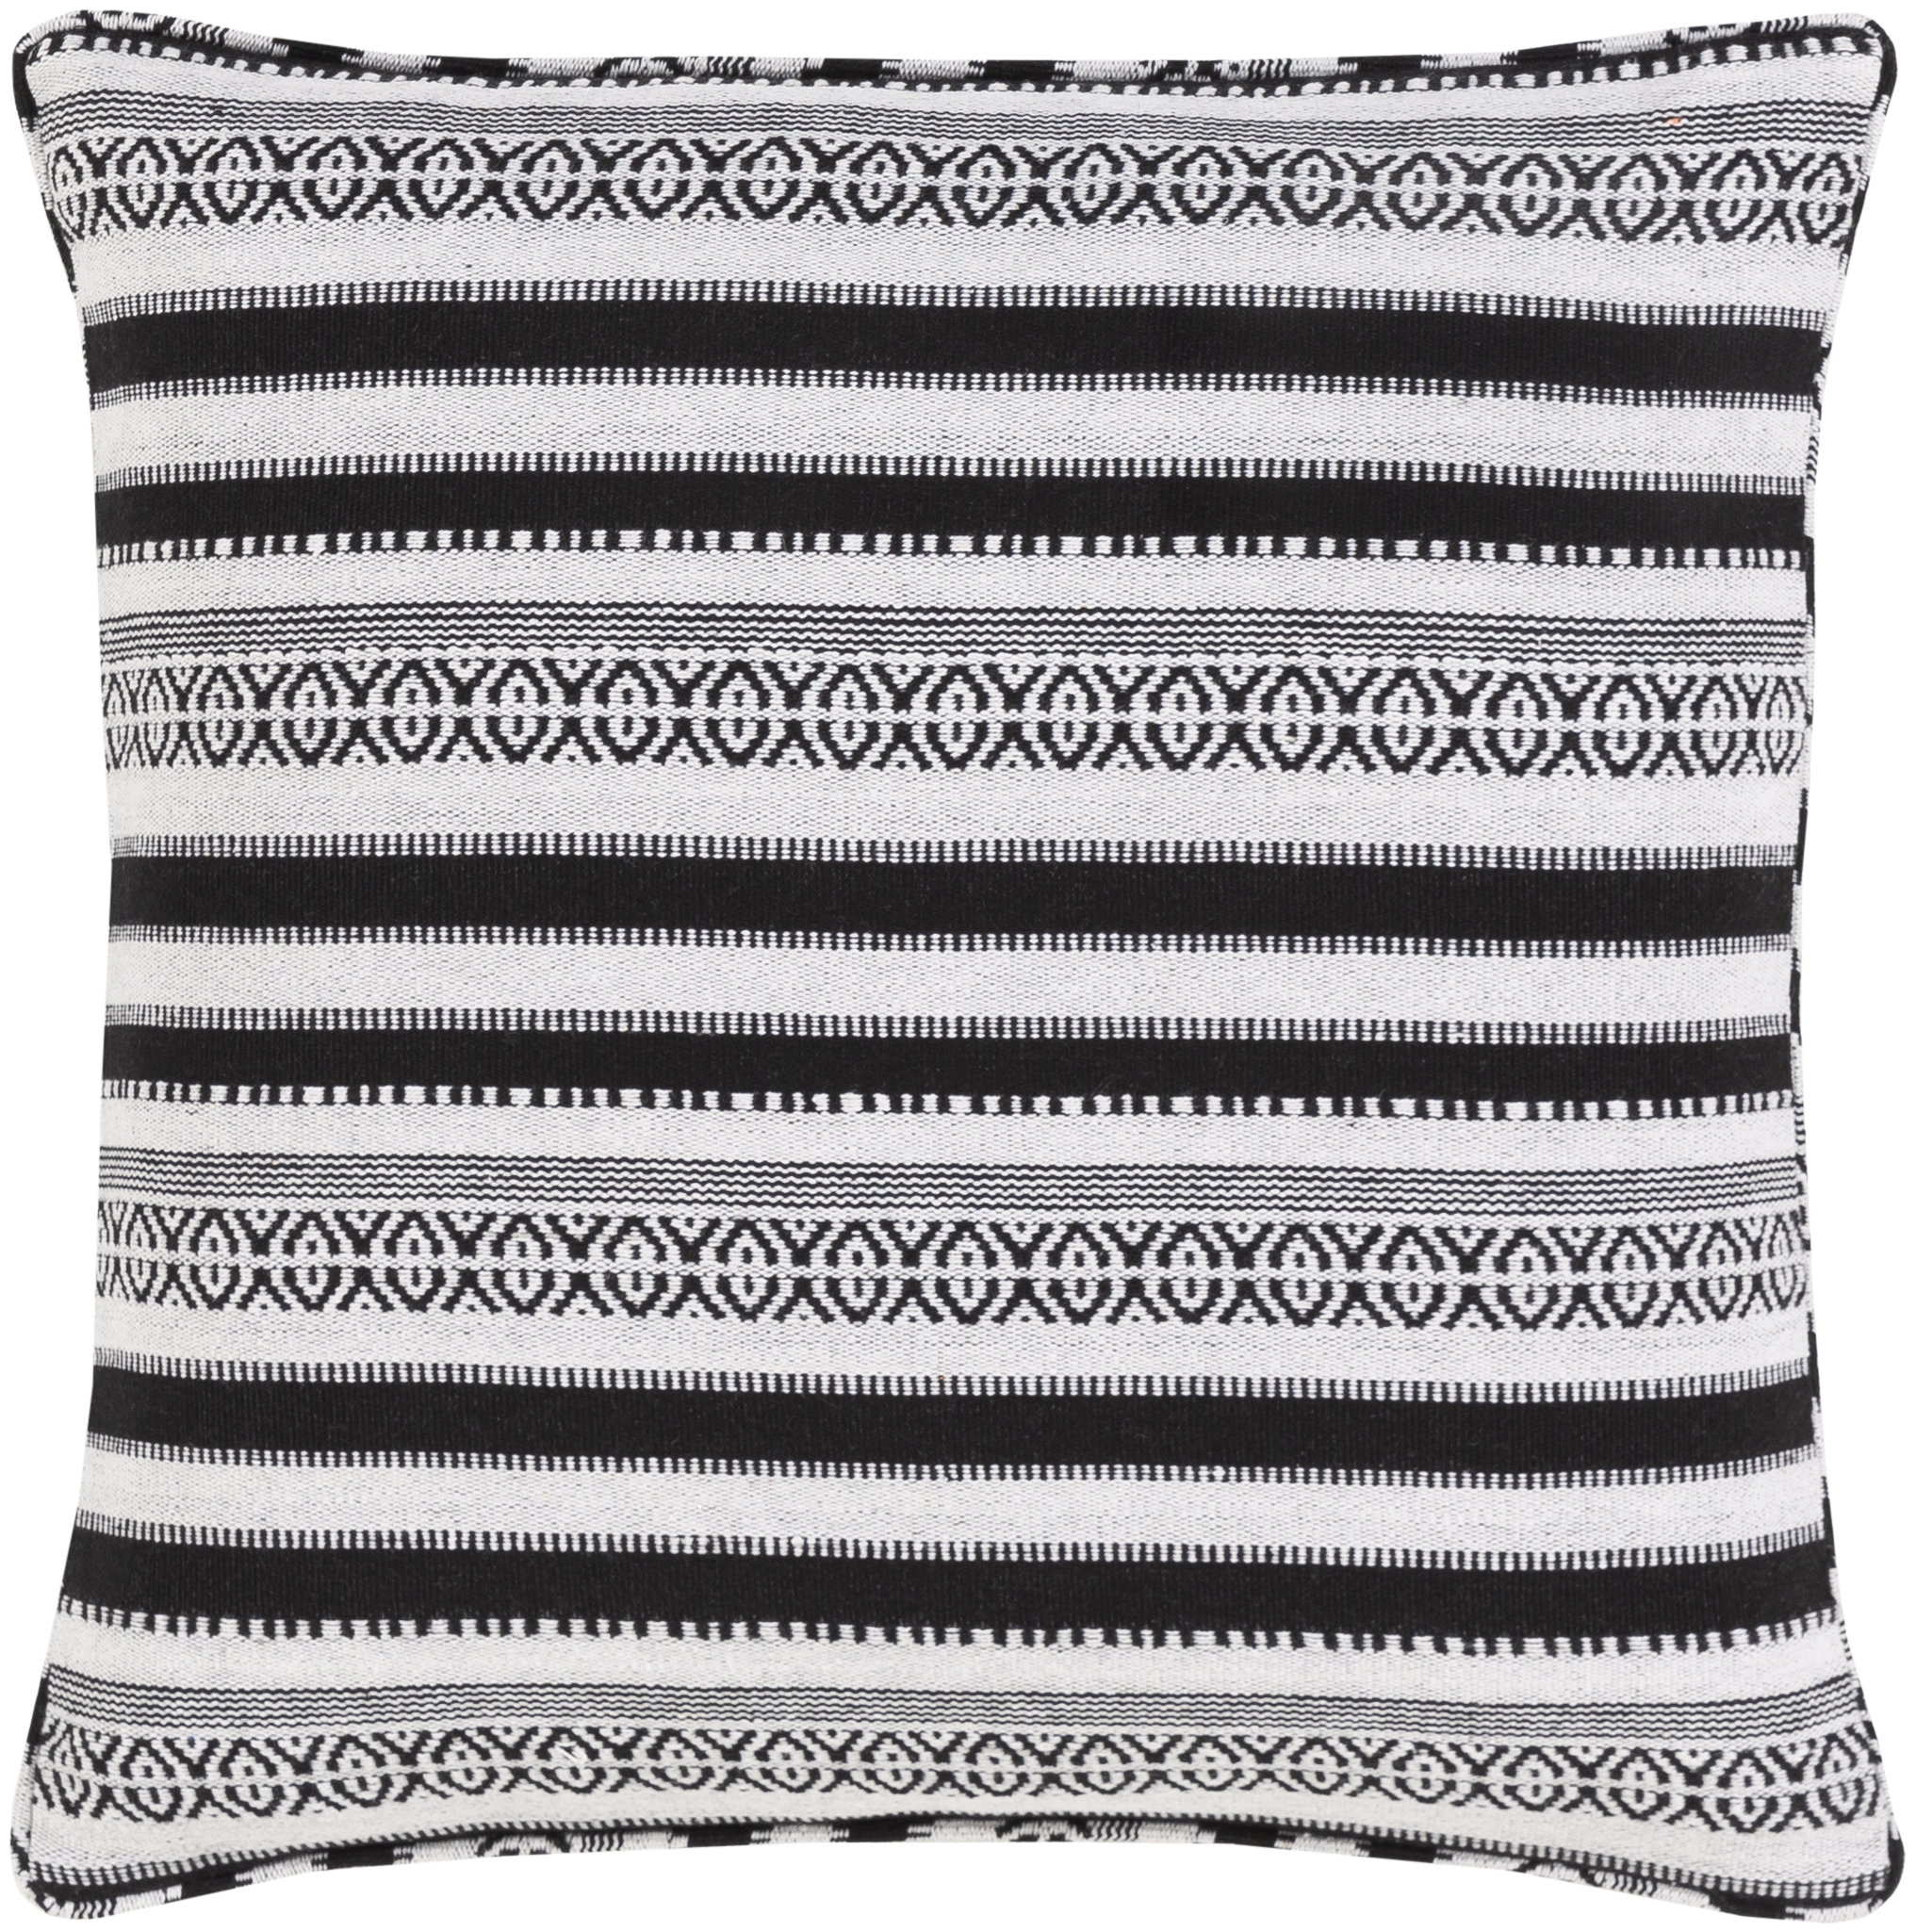 Maya - MYP-001 - 20" x 20" - pillow cover only - Image 0